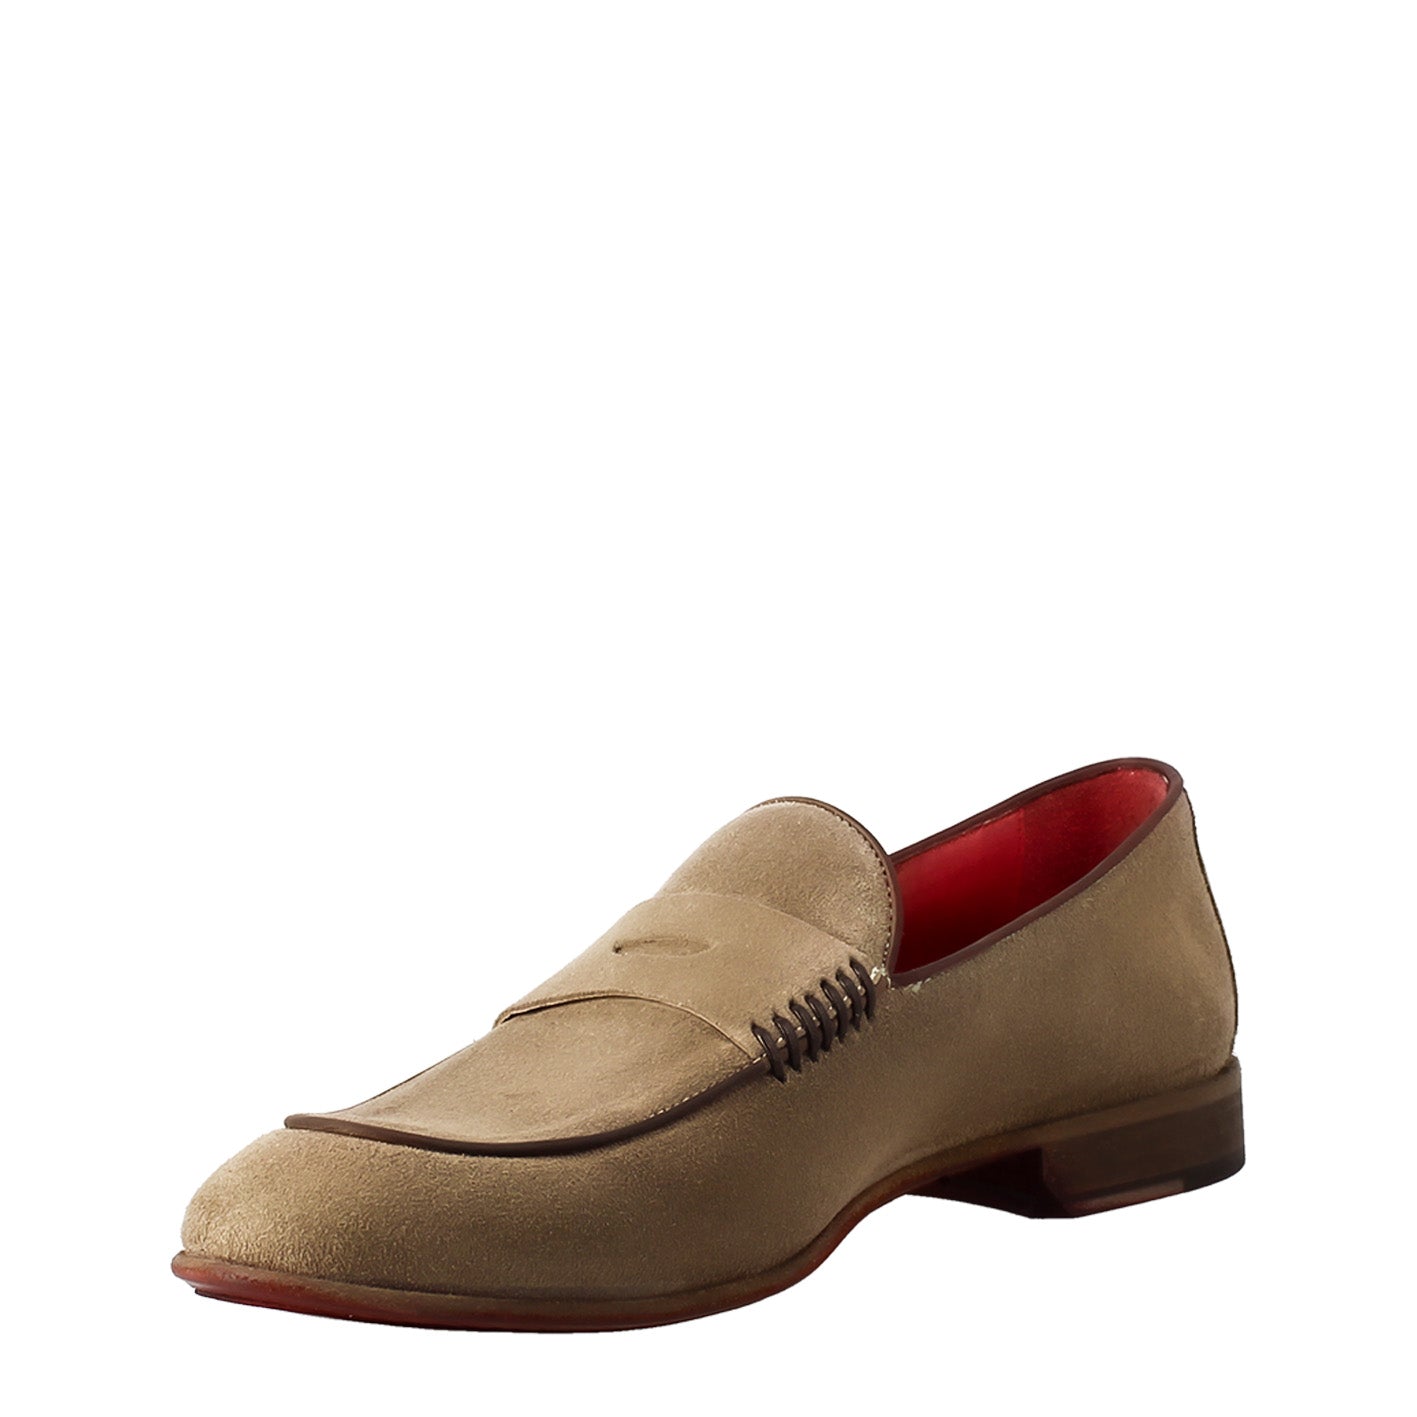 Elegant gray men's moccasin in suede leather